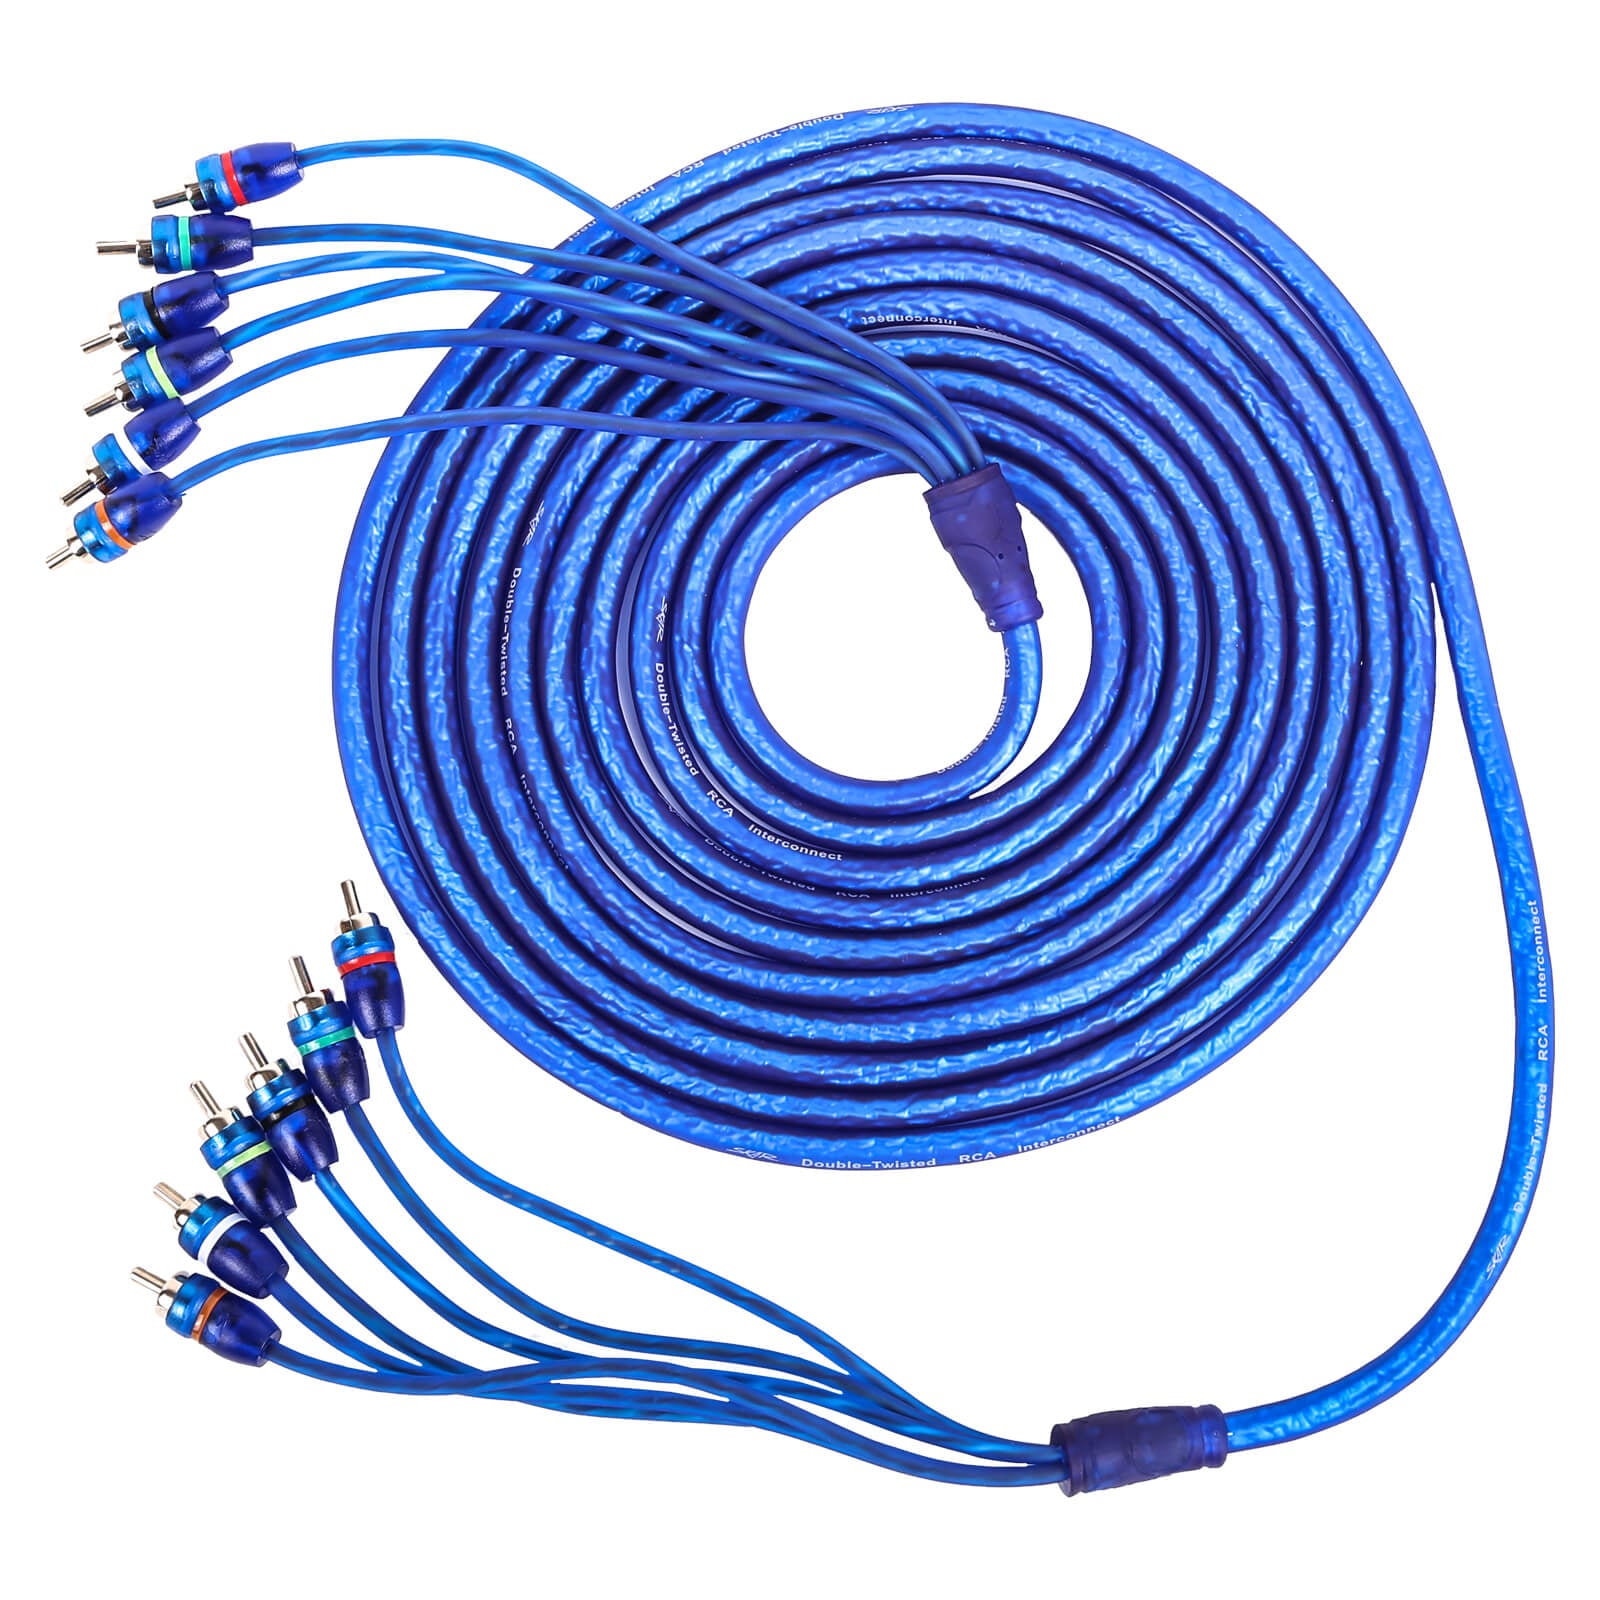 17 Ft 6-Channel Twisted Pair RCA Interconnect Cable (SKAR6CH-RCA17)